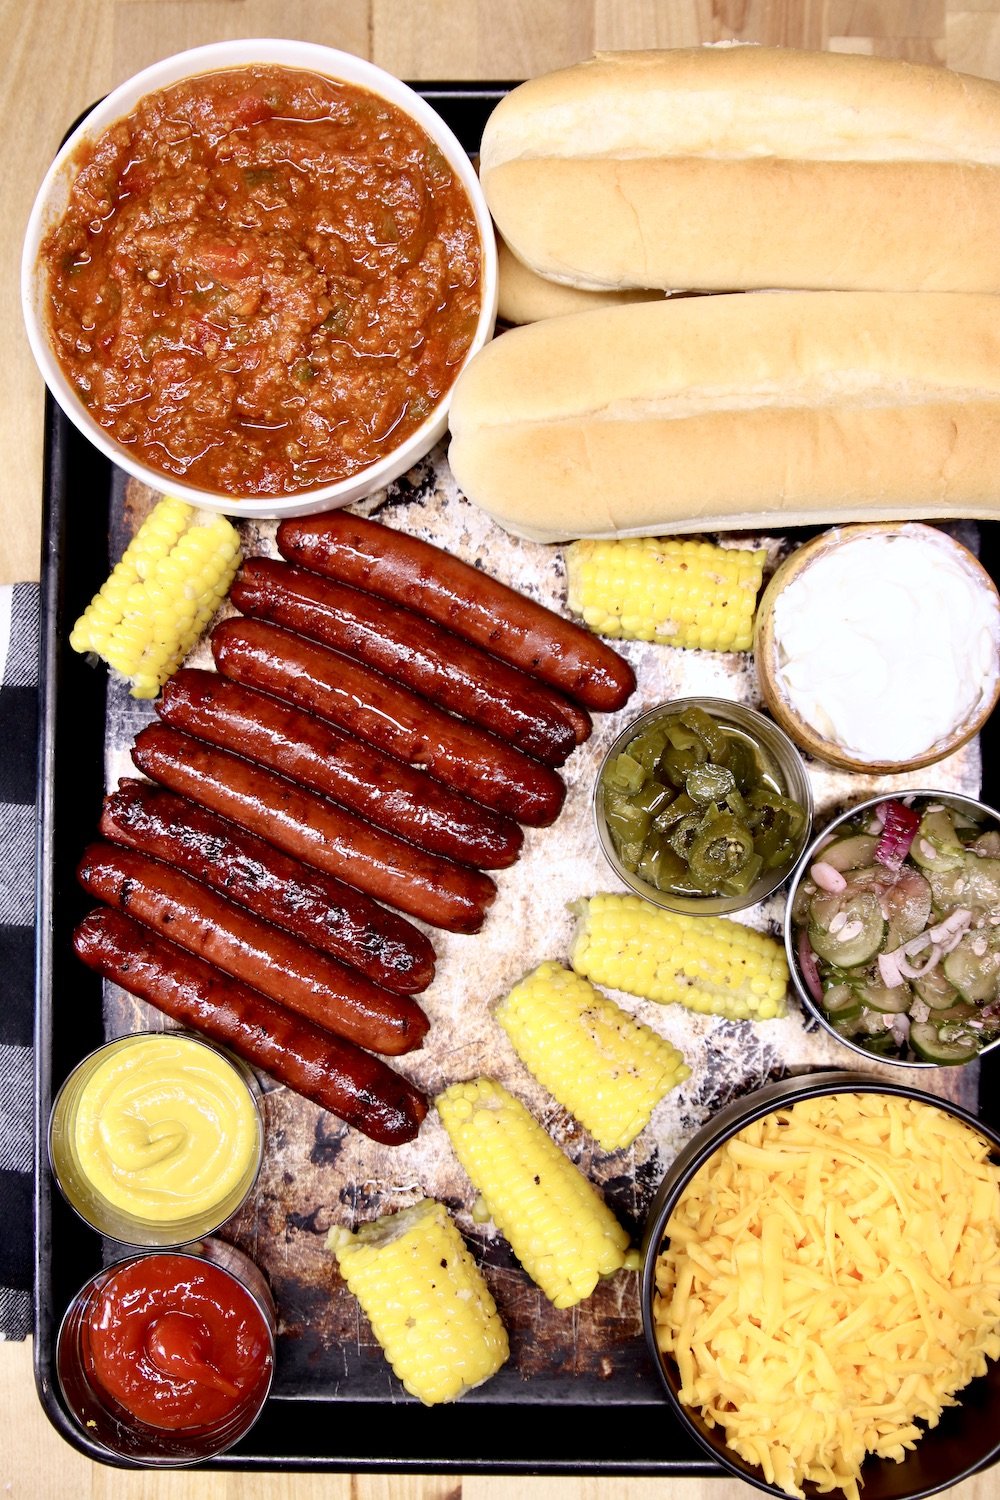 Baking sheet with hot dog chili, buns, grilled hot dogs, corn on the cob, shredded cheese, condiments